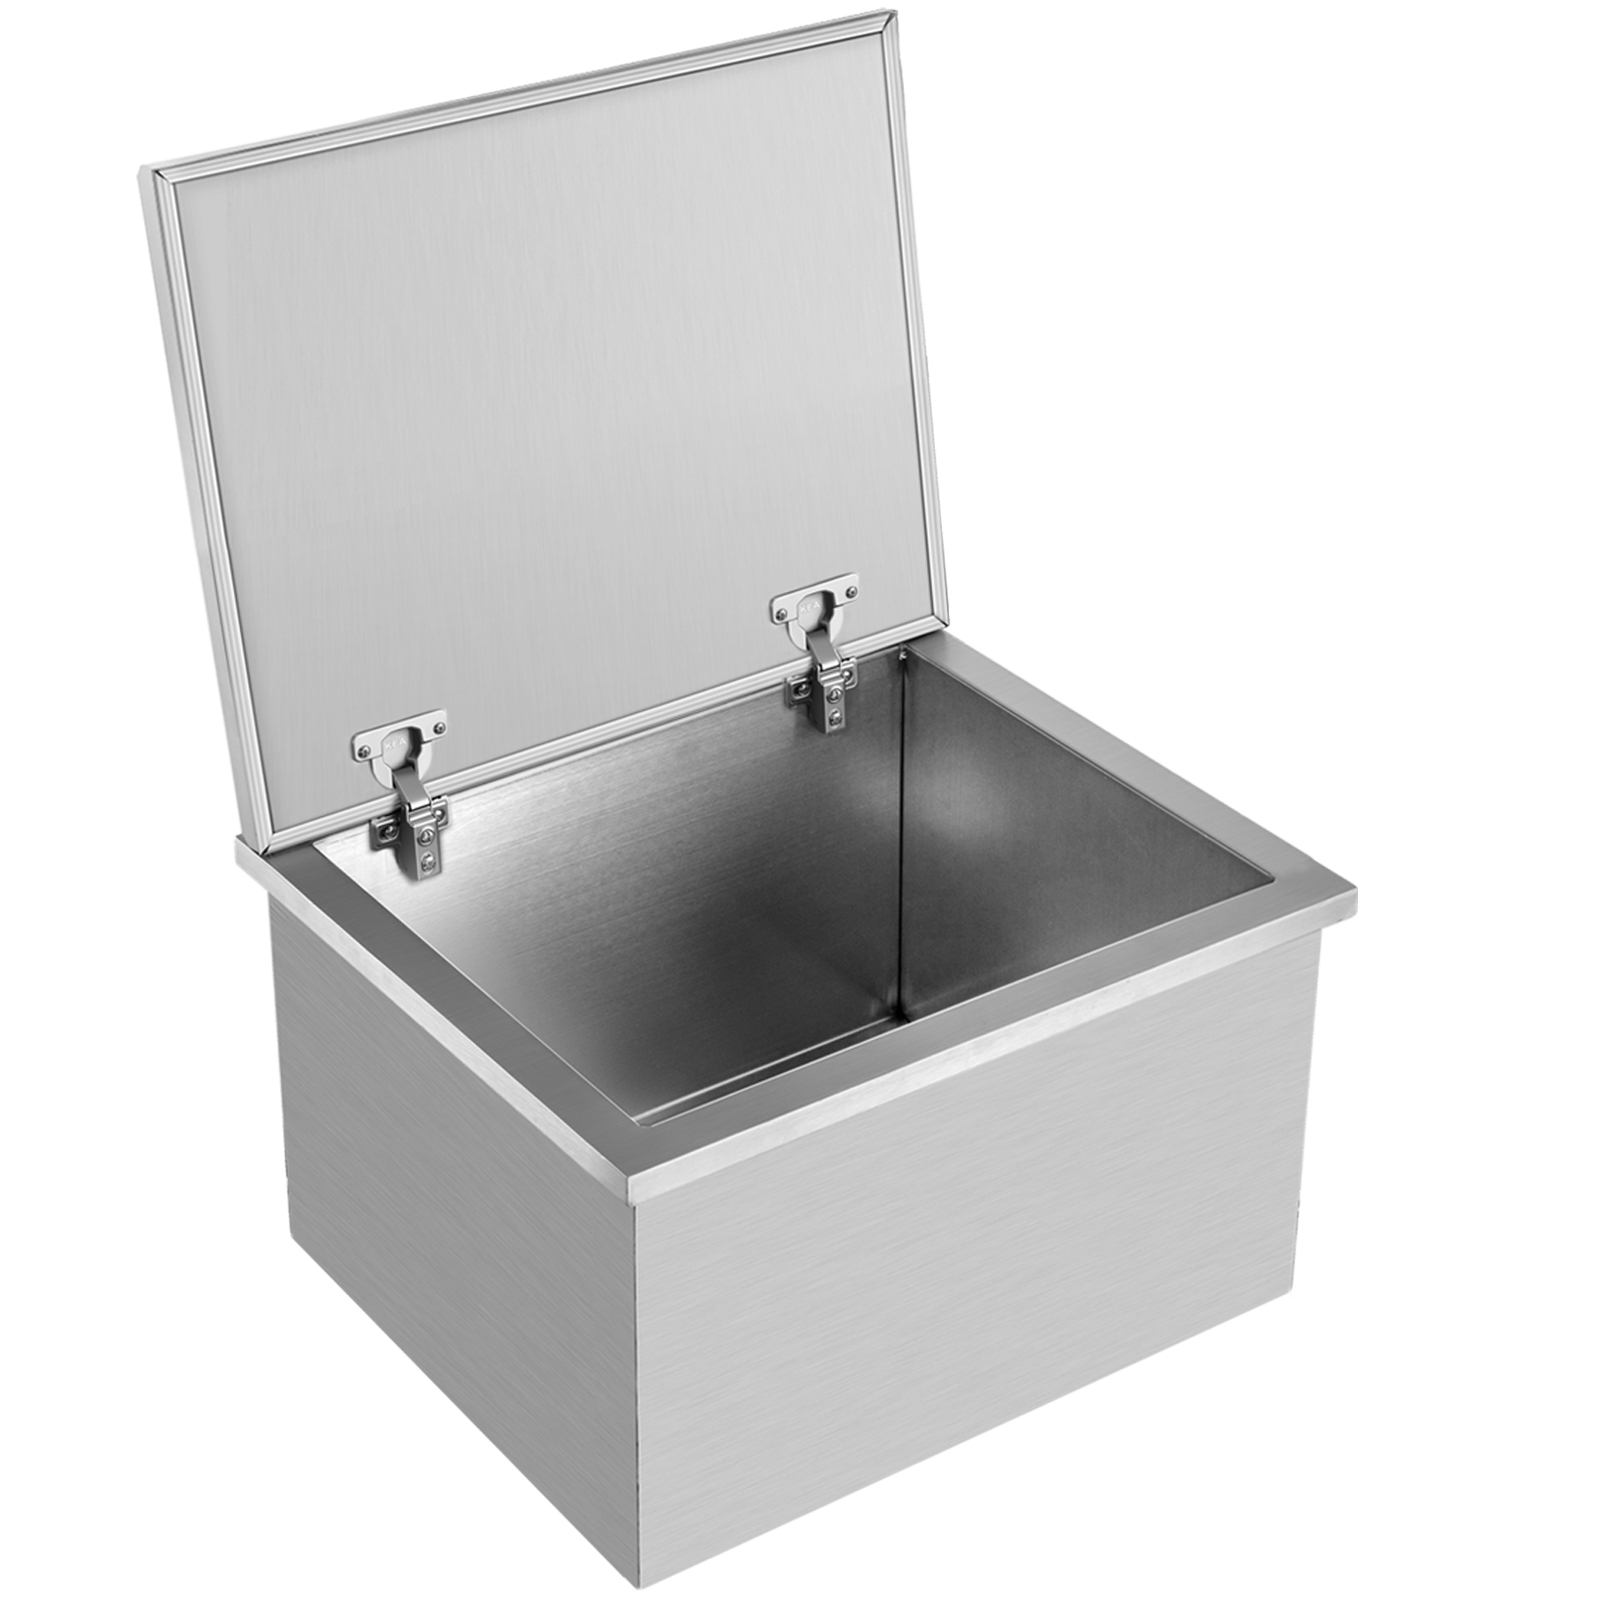 Drop in Cooler,Cover,Stainless Steel